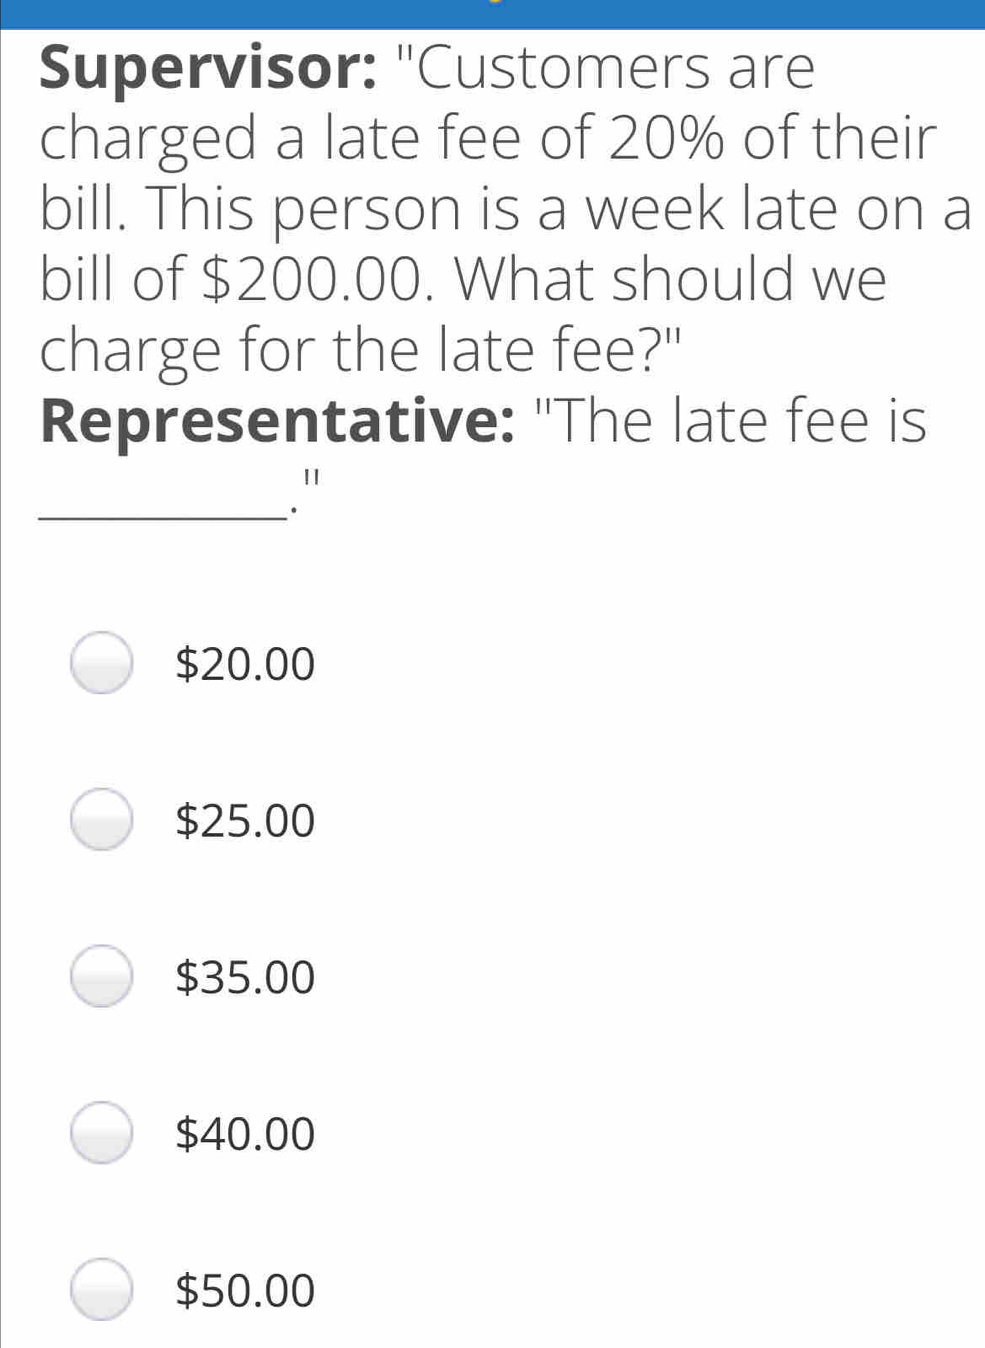 Supervisor: "Customers are charged a late fee of 20% of their bill. This person is a week late on a bill of $ 200.00. What should we charge for the late fee?" Representative: "The late fee is _." $ 20.00 $ 25.00 $ 35.00 $ 40.00 $ 50.00